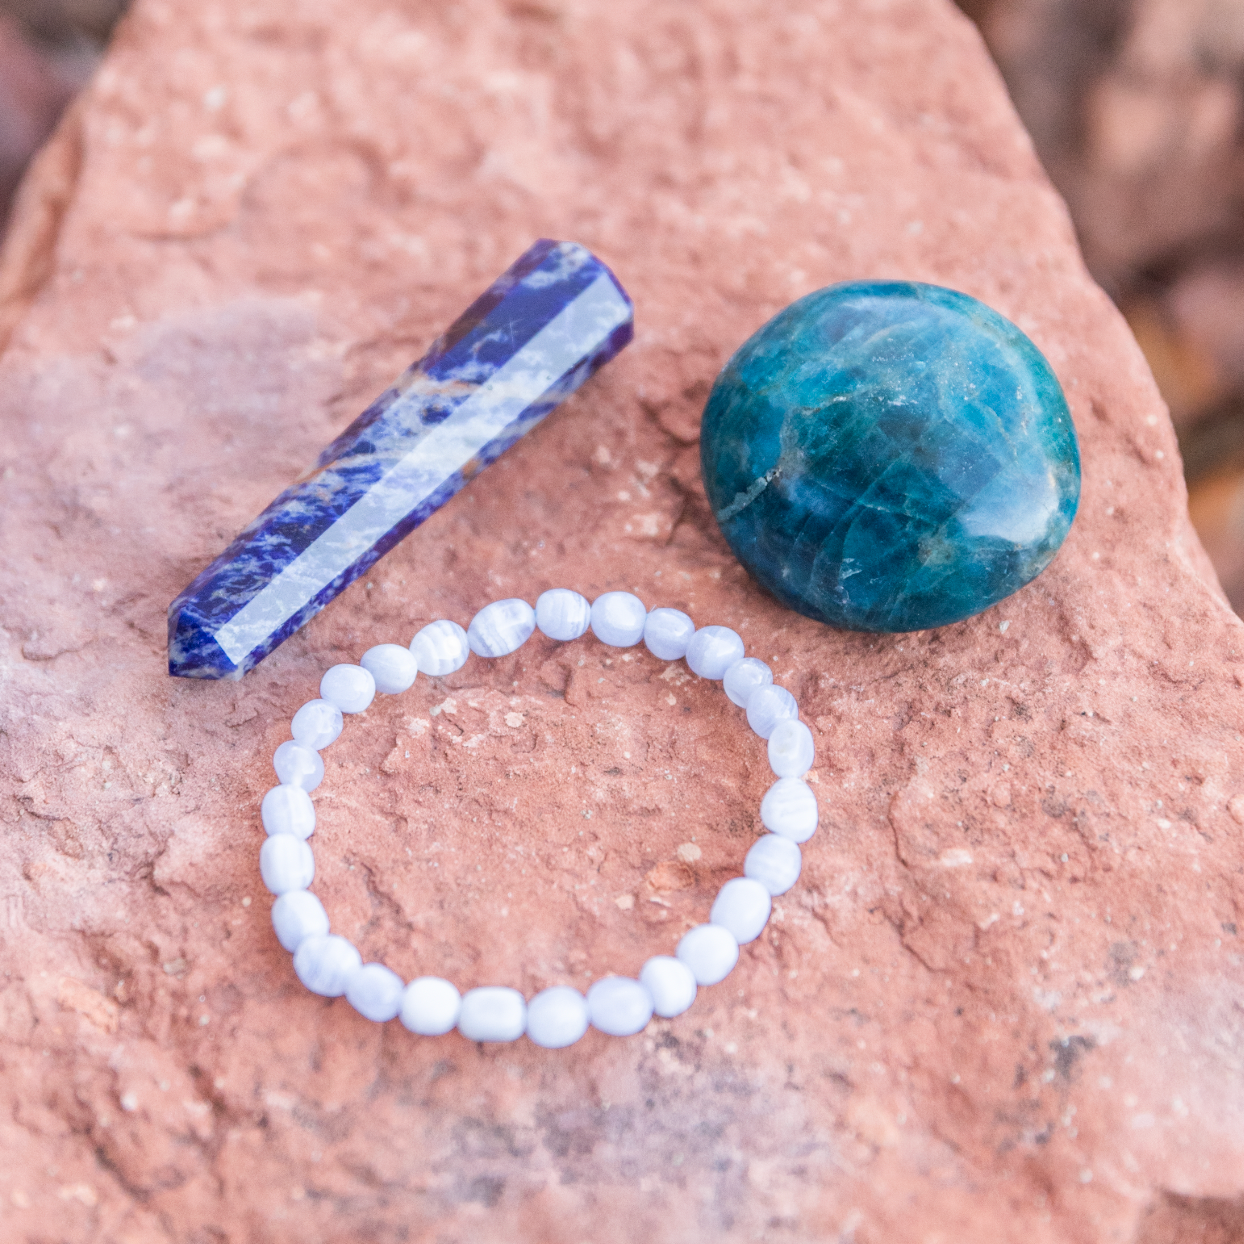 healing crystals: a bundle of crystals used for better communication in sedona, arizona